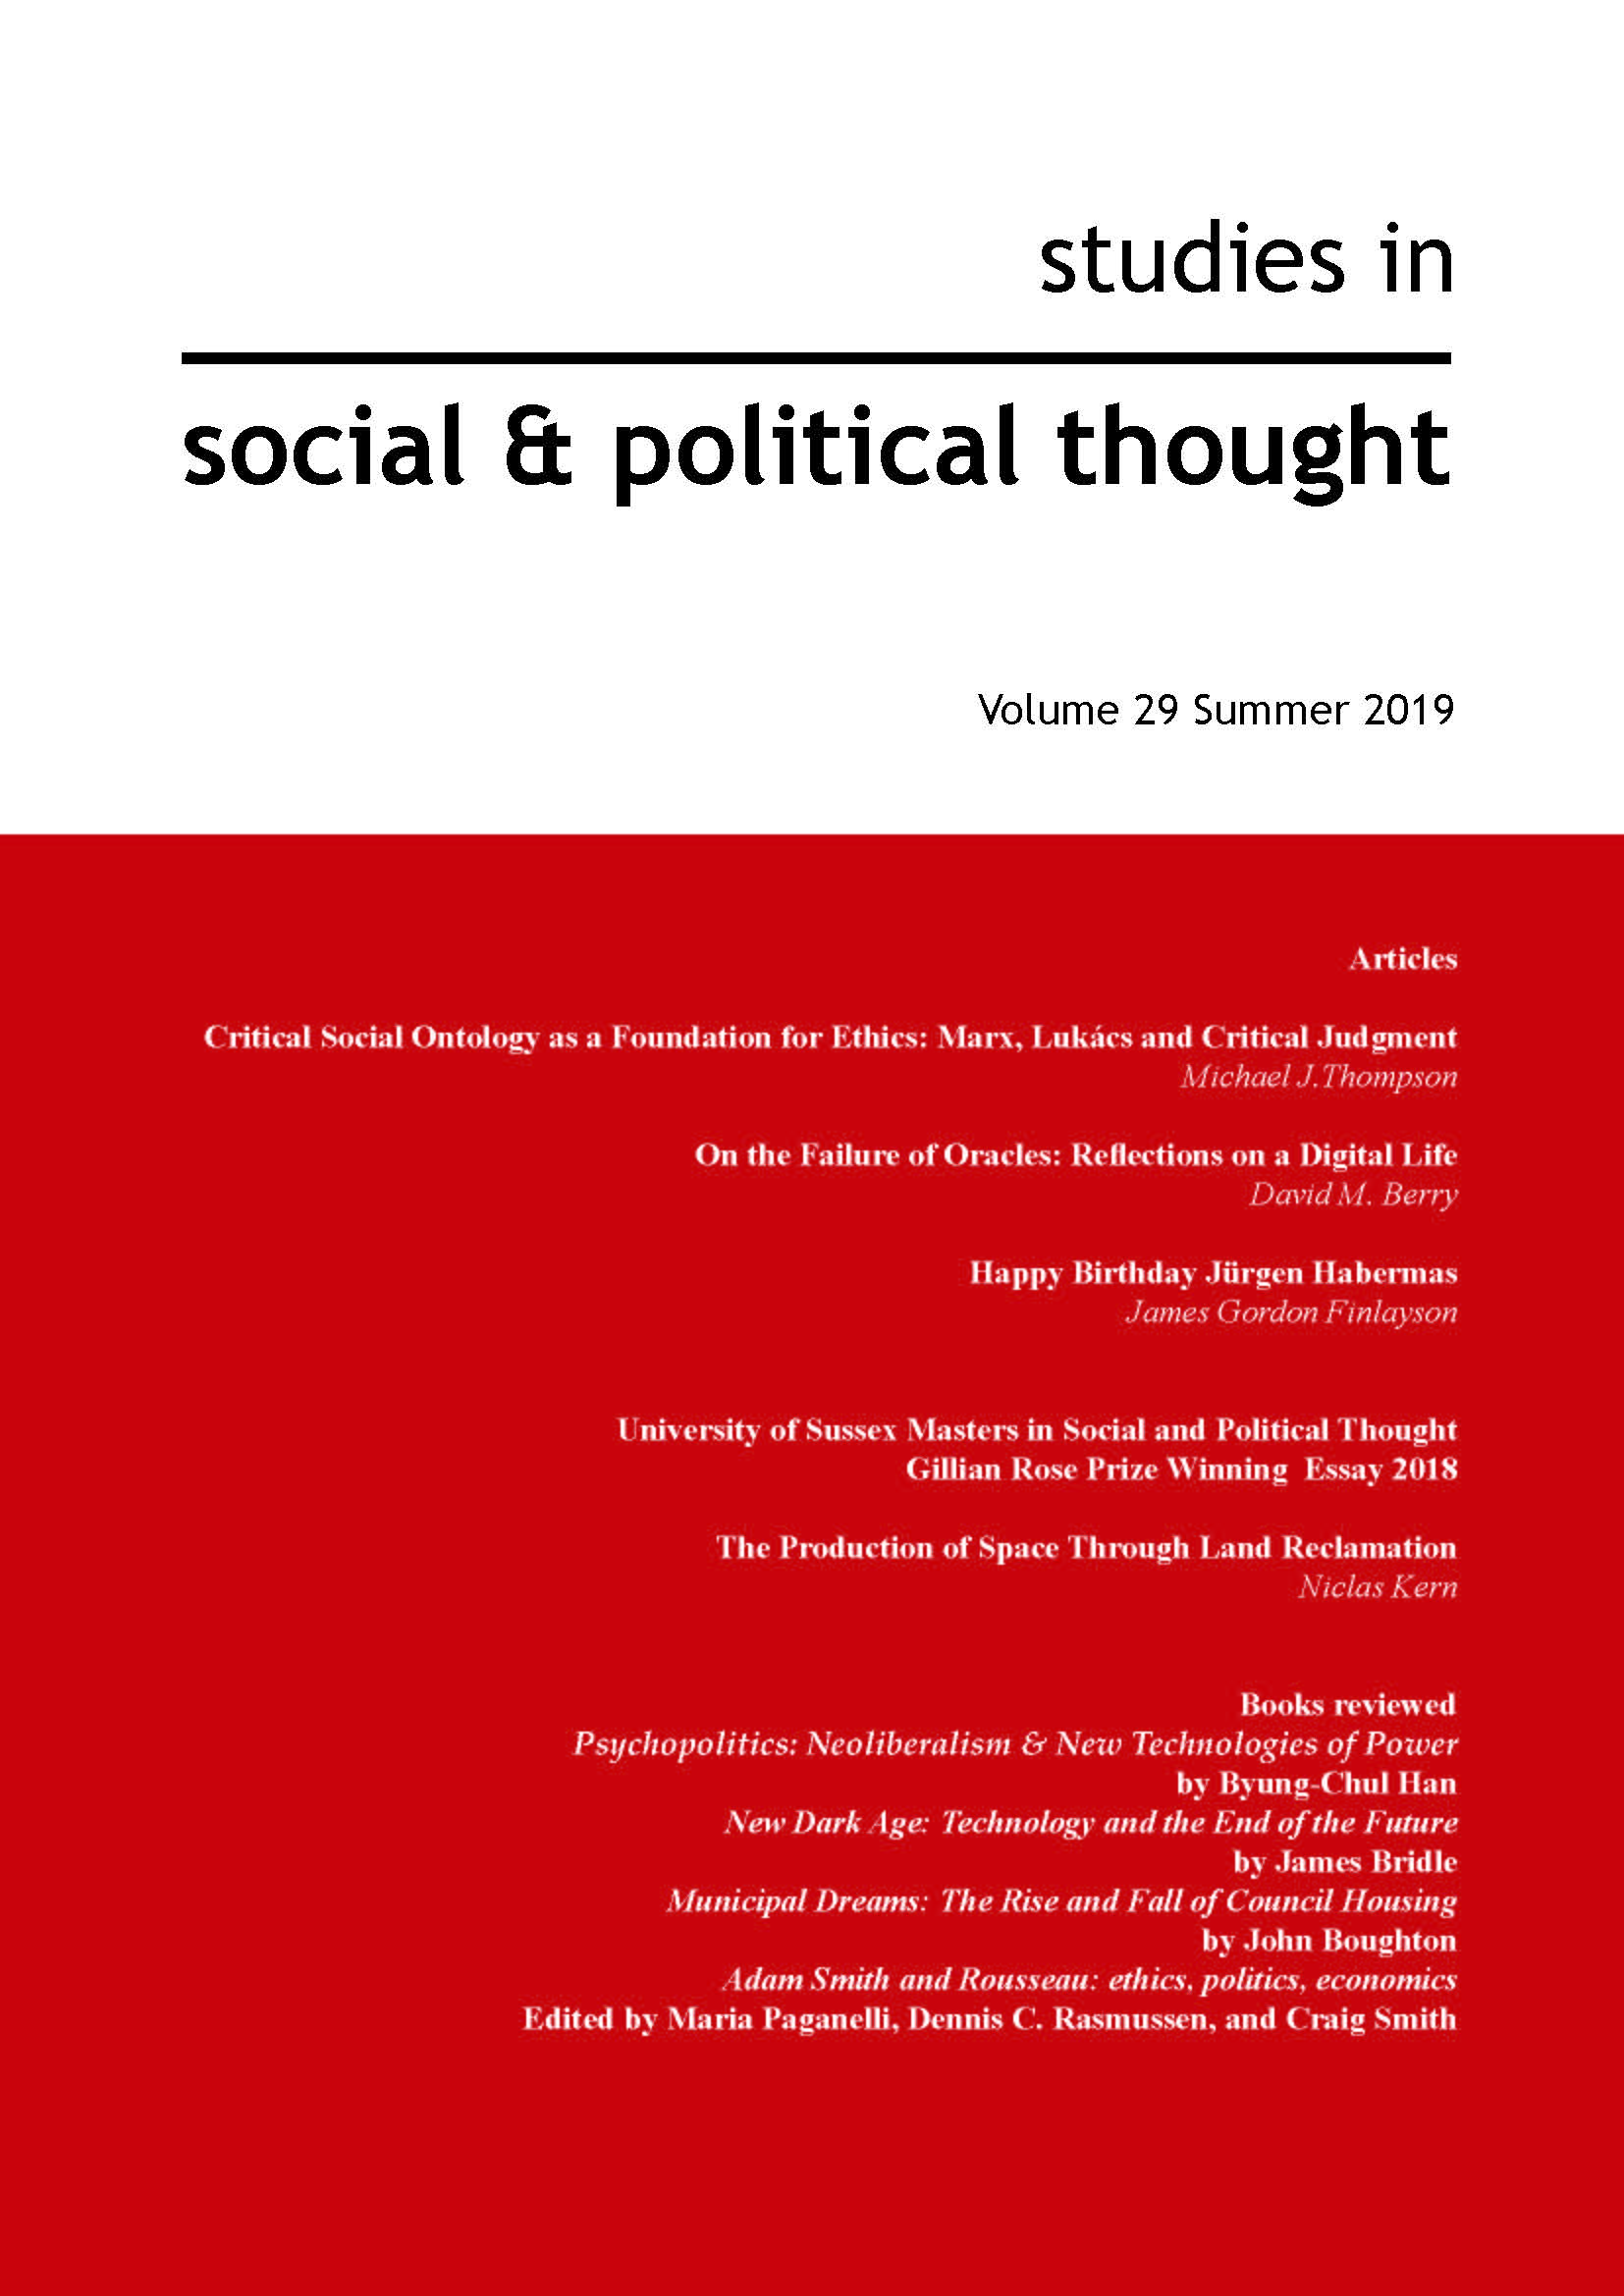 Front cover of SSPT Journal Vol 29, Summer 2019, listing articles and reviews contained within.